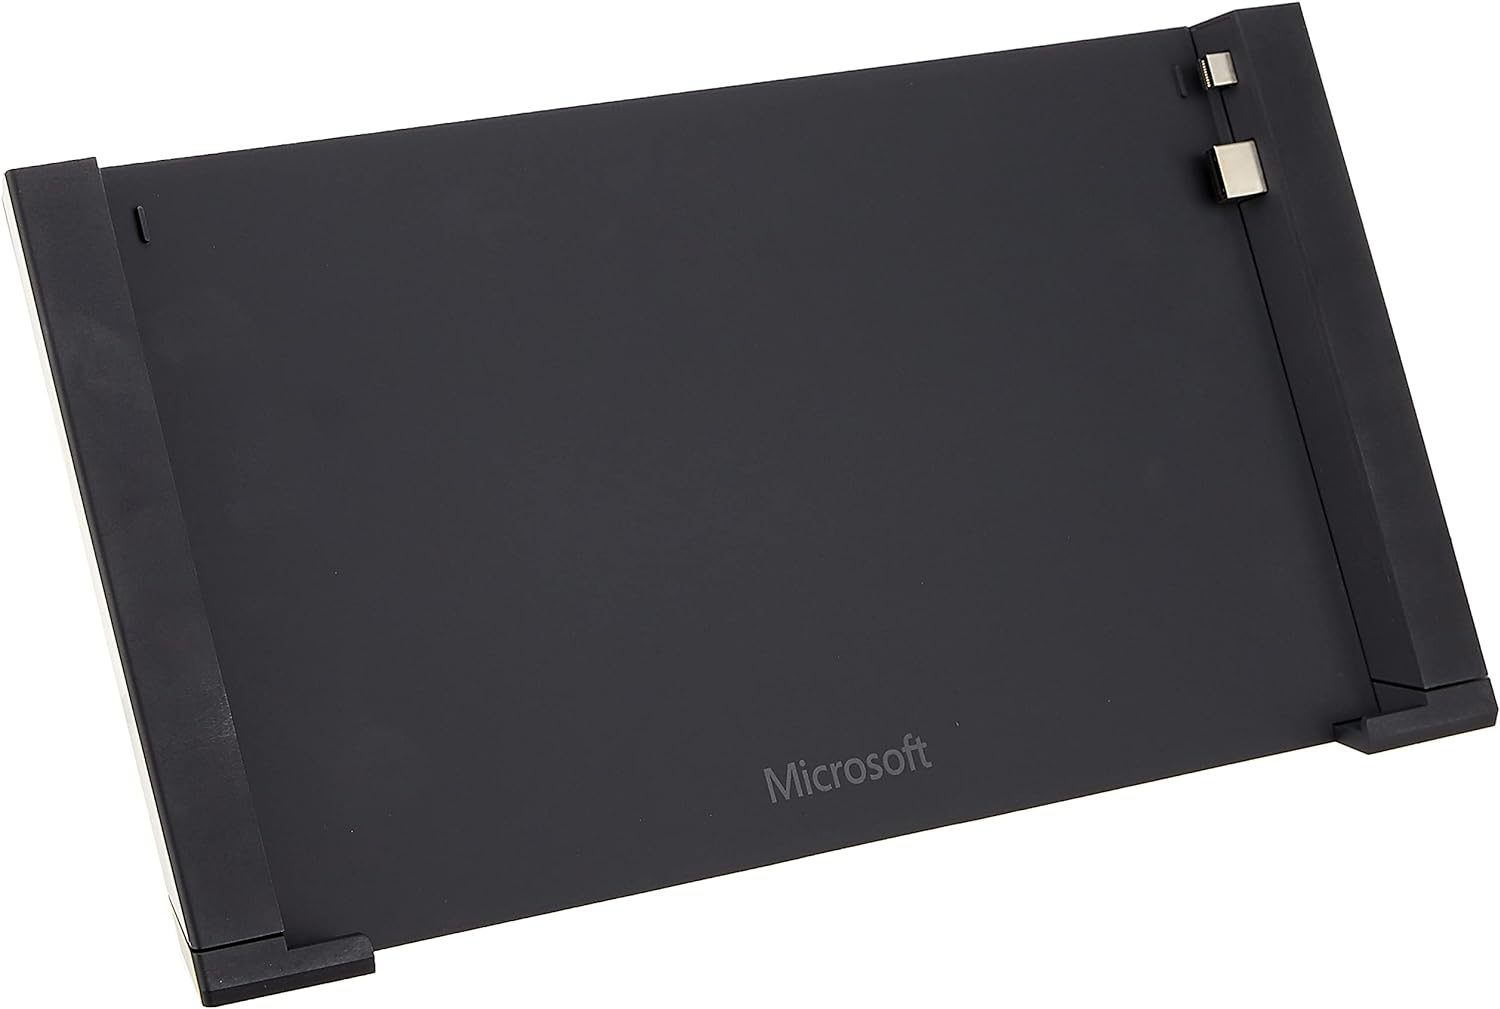 Microsoft Docking Station for Surface 3 (not compatible with Surface Pro 3) SC EN/XD/ES Hdwr (GJ3-00001)